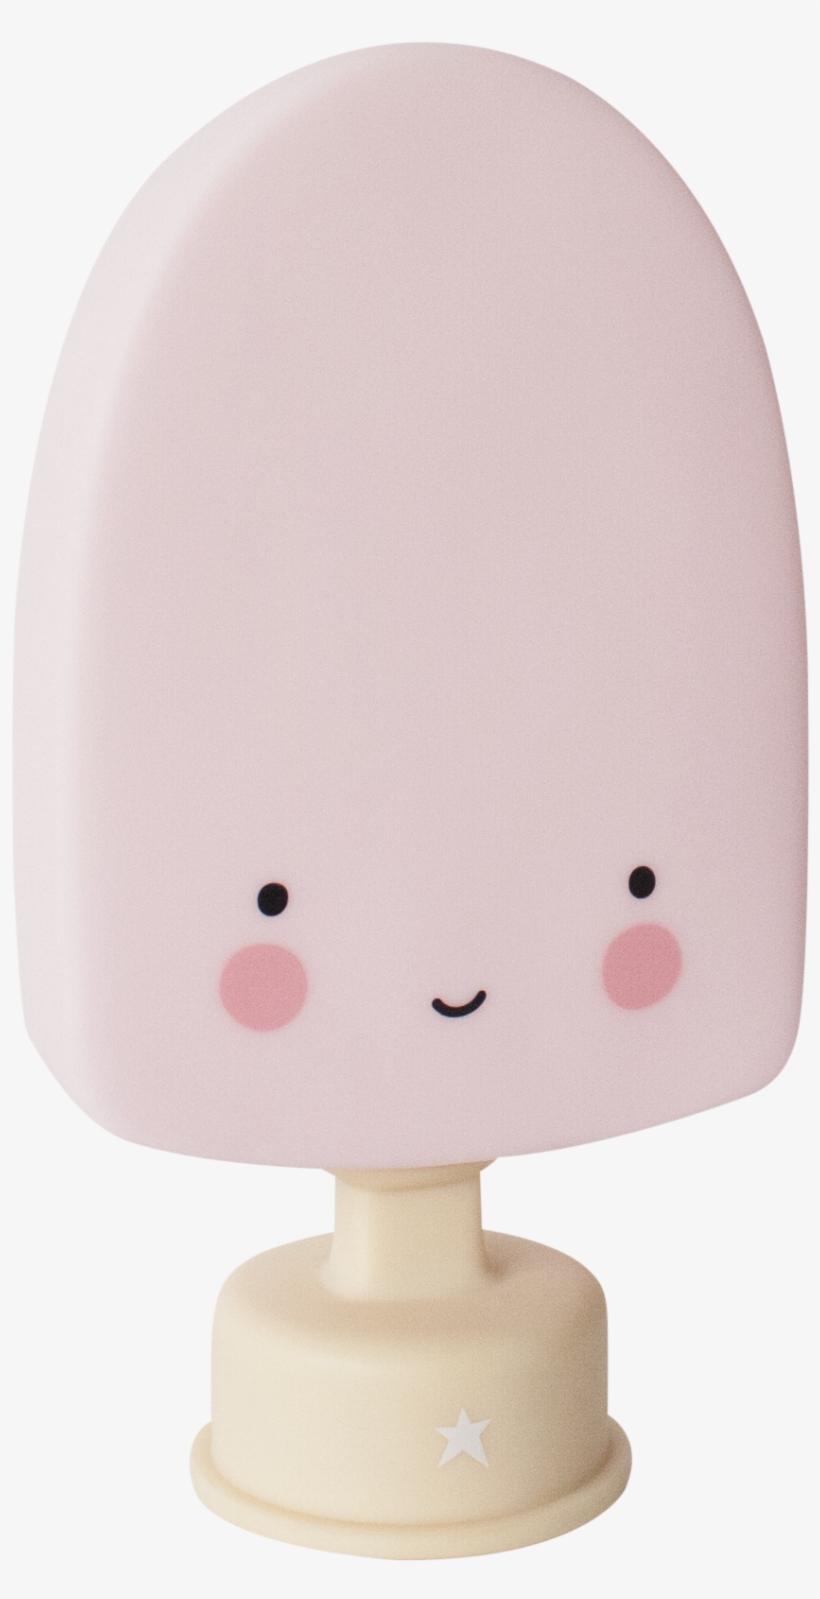 Popsicle Nightlights - Little Lovely Company Popsicle, transparent png #5842383